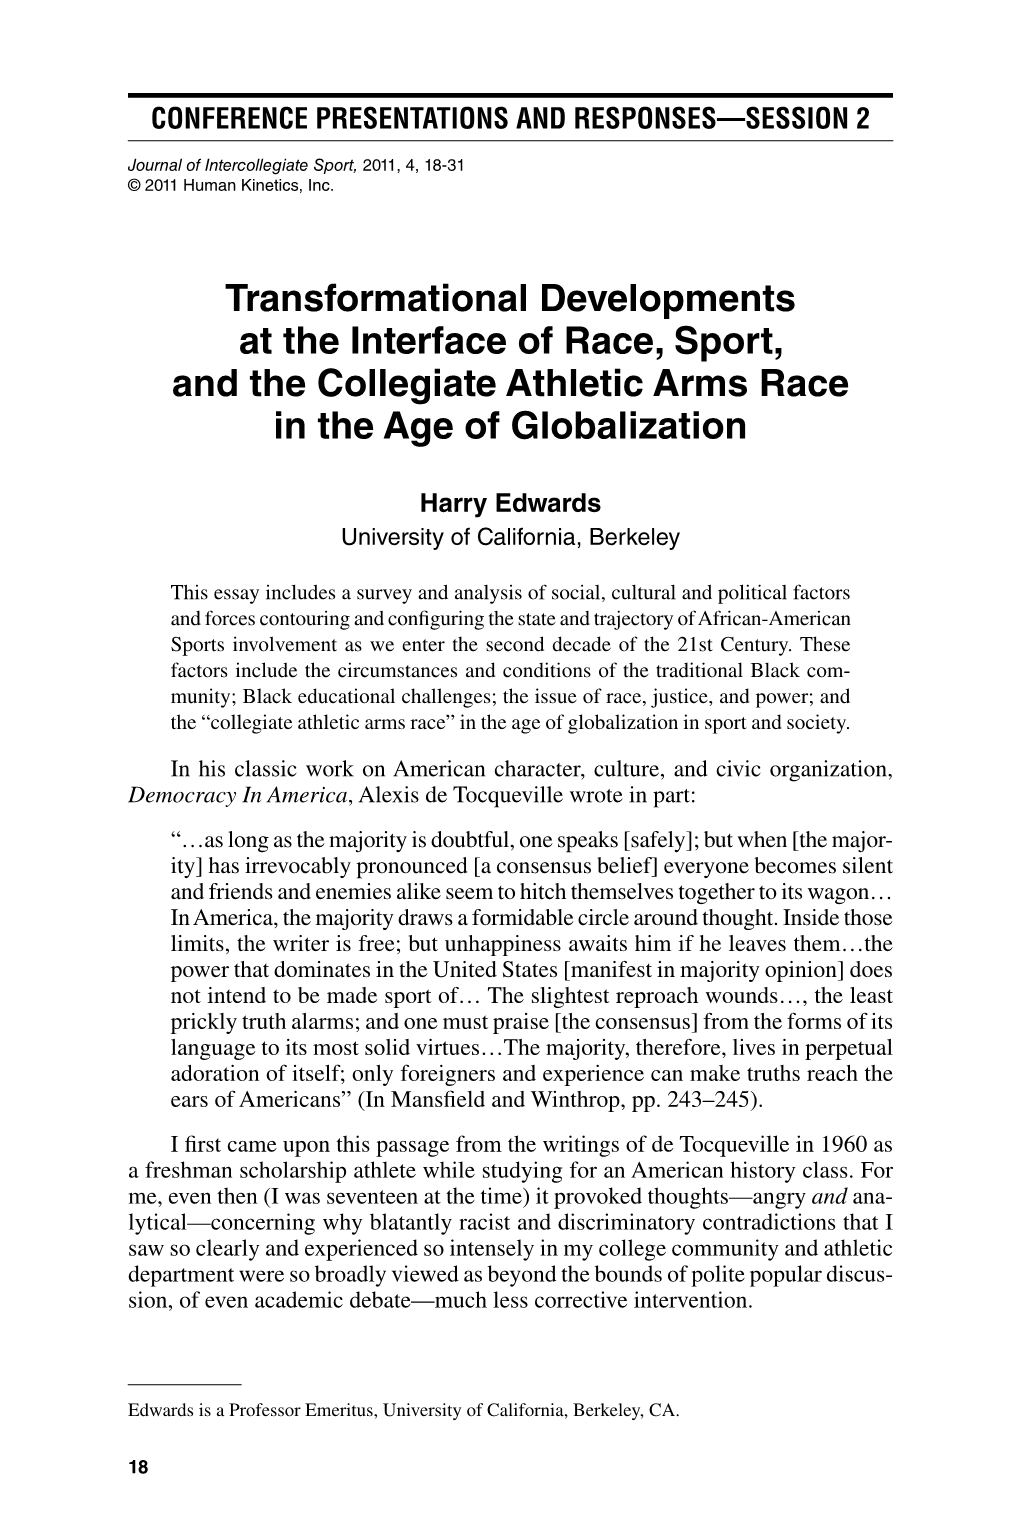 Transformational Developments at the Interface of Race, Sport, and the Collegiate Athletic Arms Race in the Age of Globalization